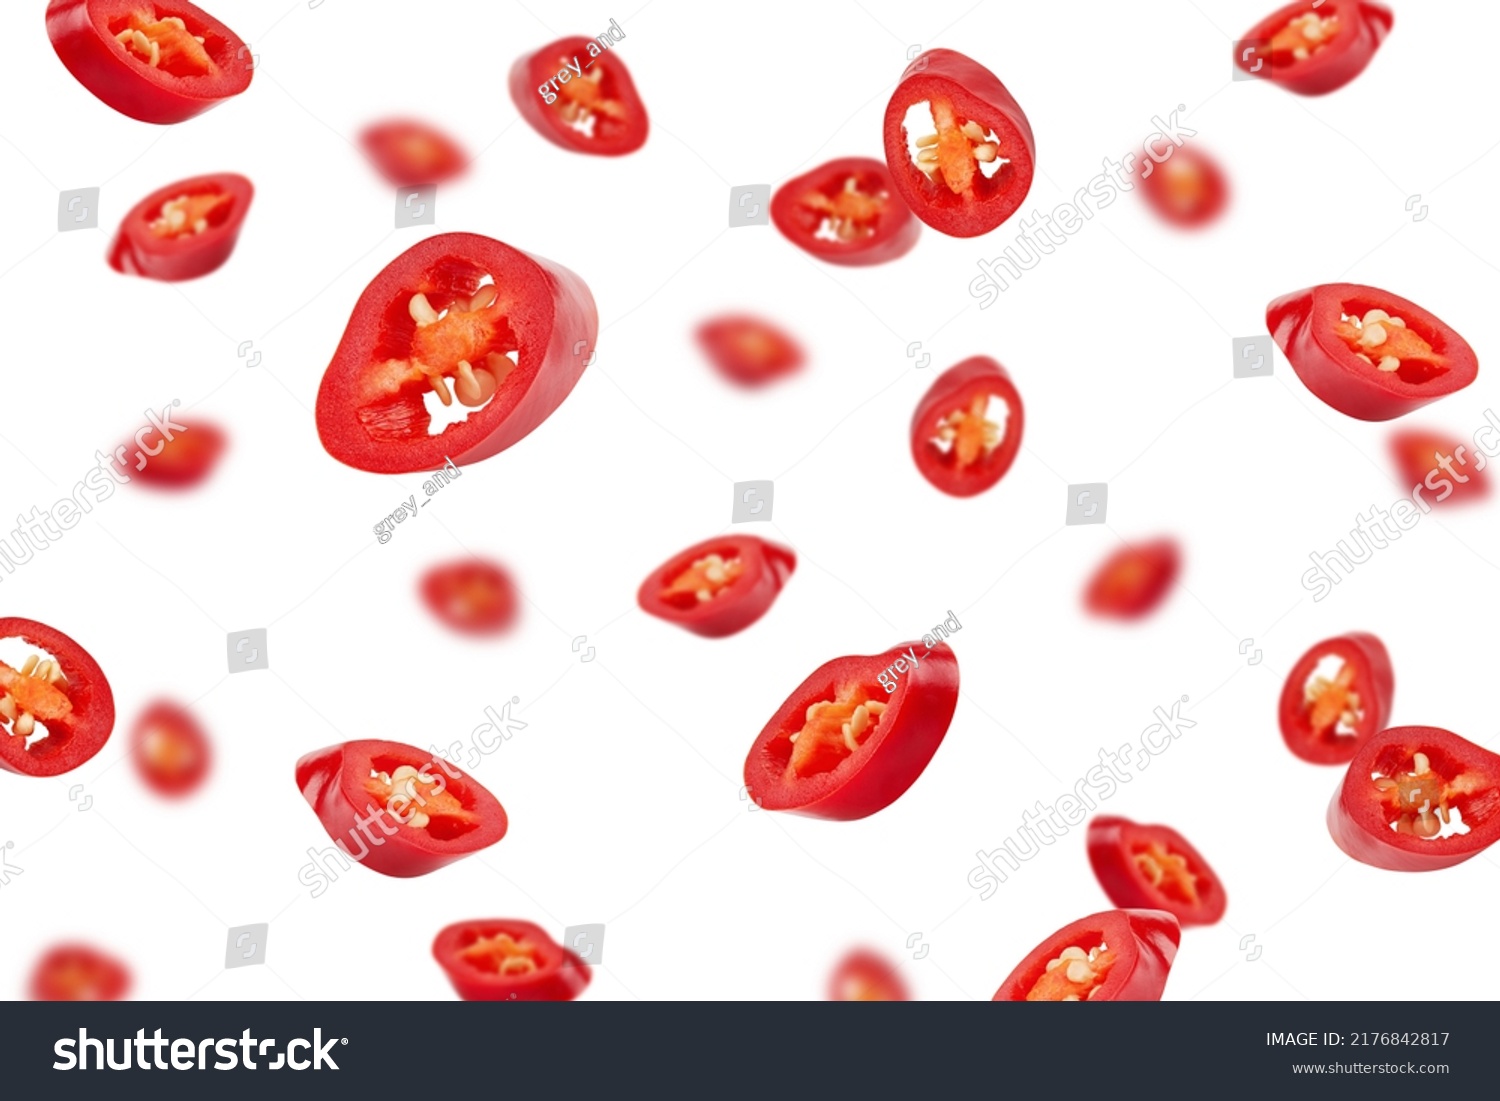 Falling sliced red hot chili peppers isolated on white background, selective focus #2176842817